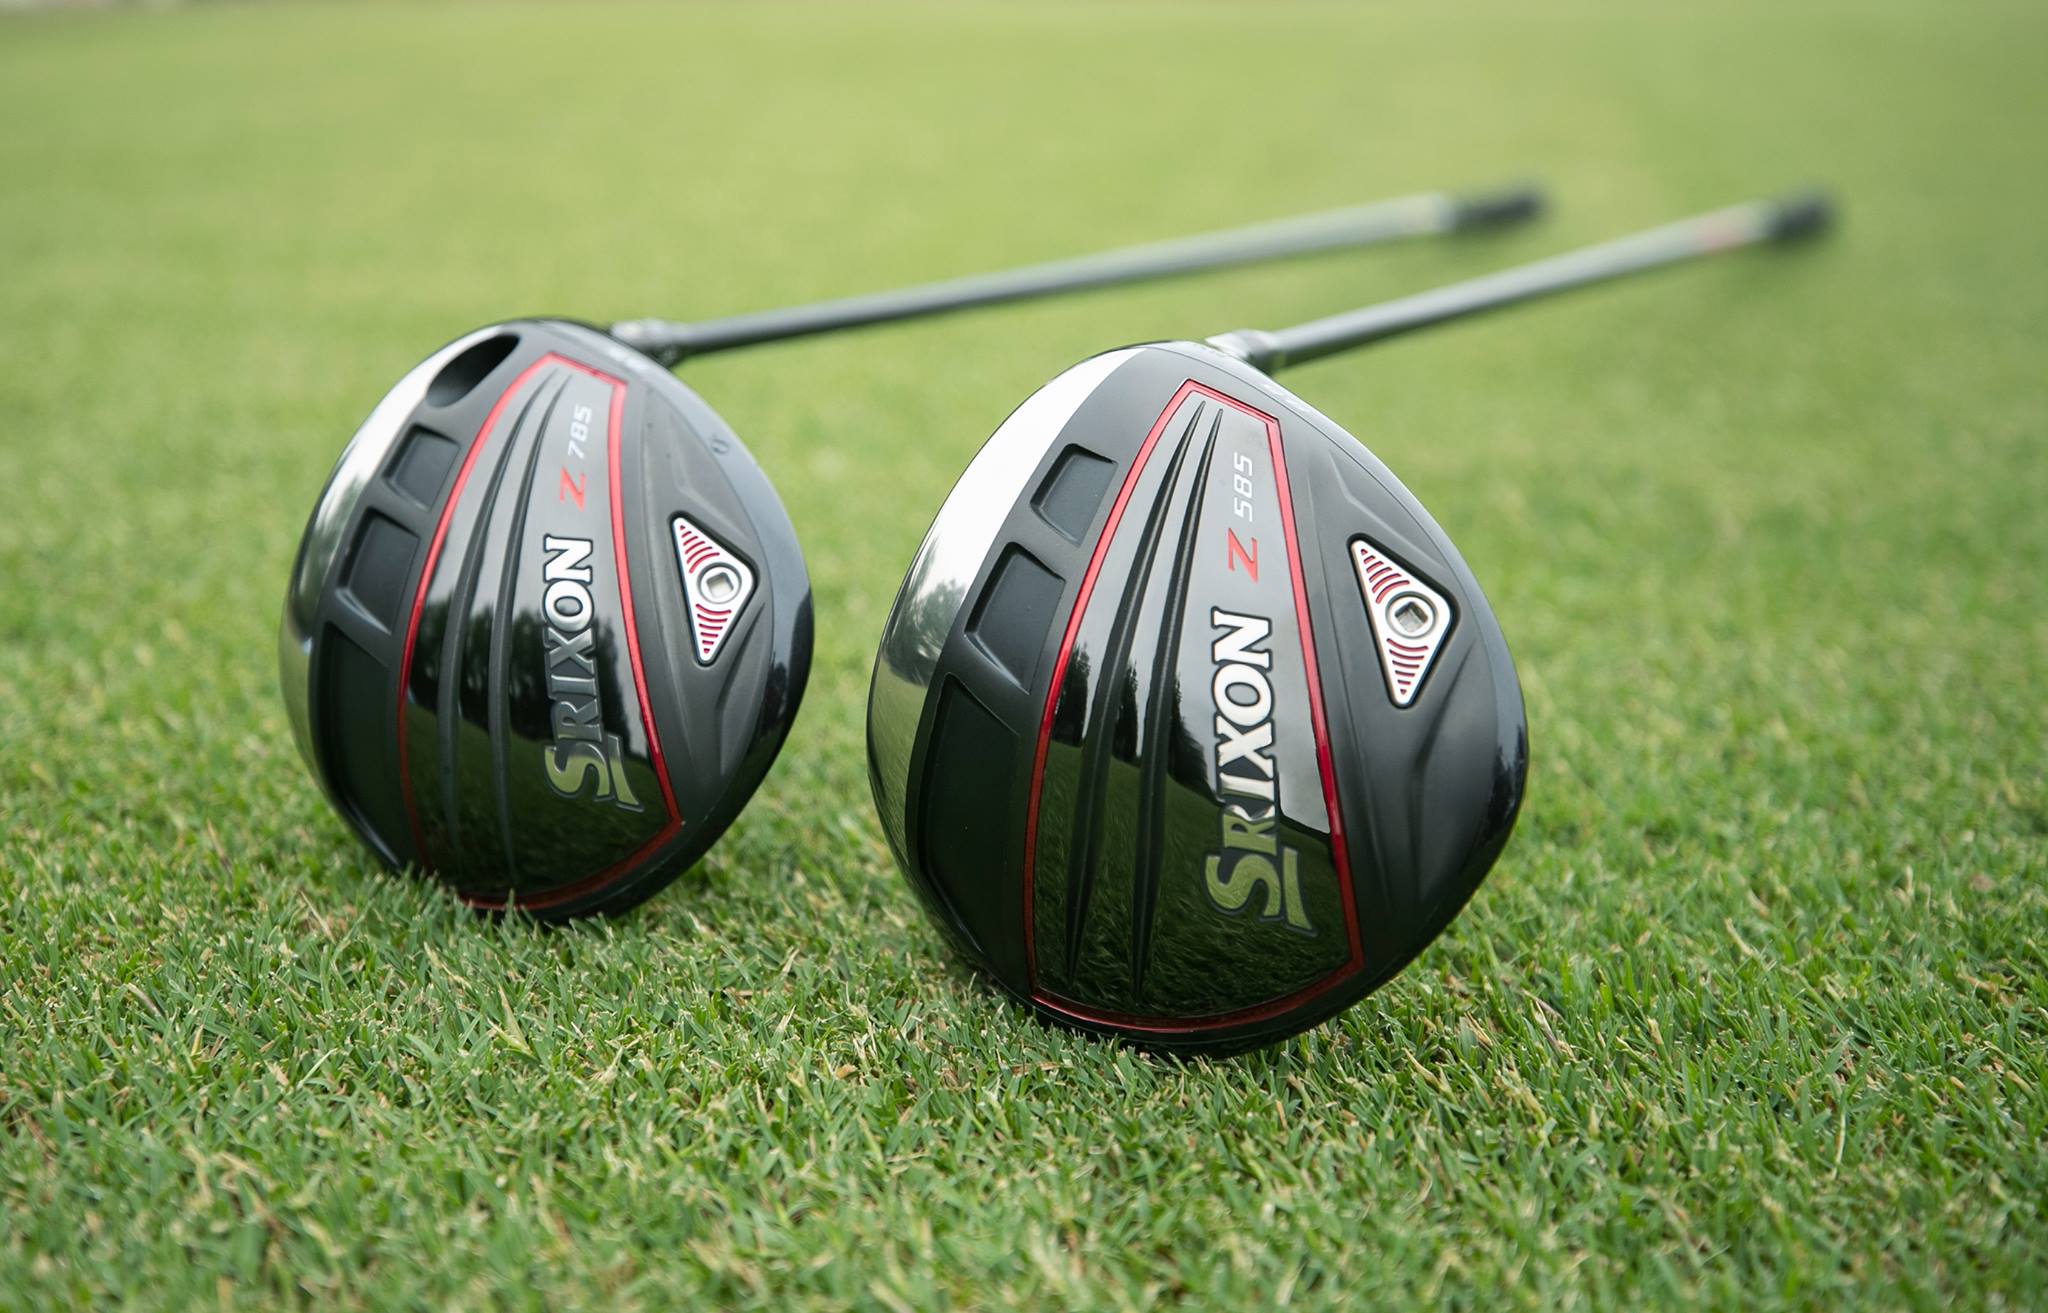 Srixon Golf Demo Day at Crystal Springs Golf Course